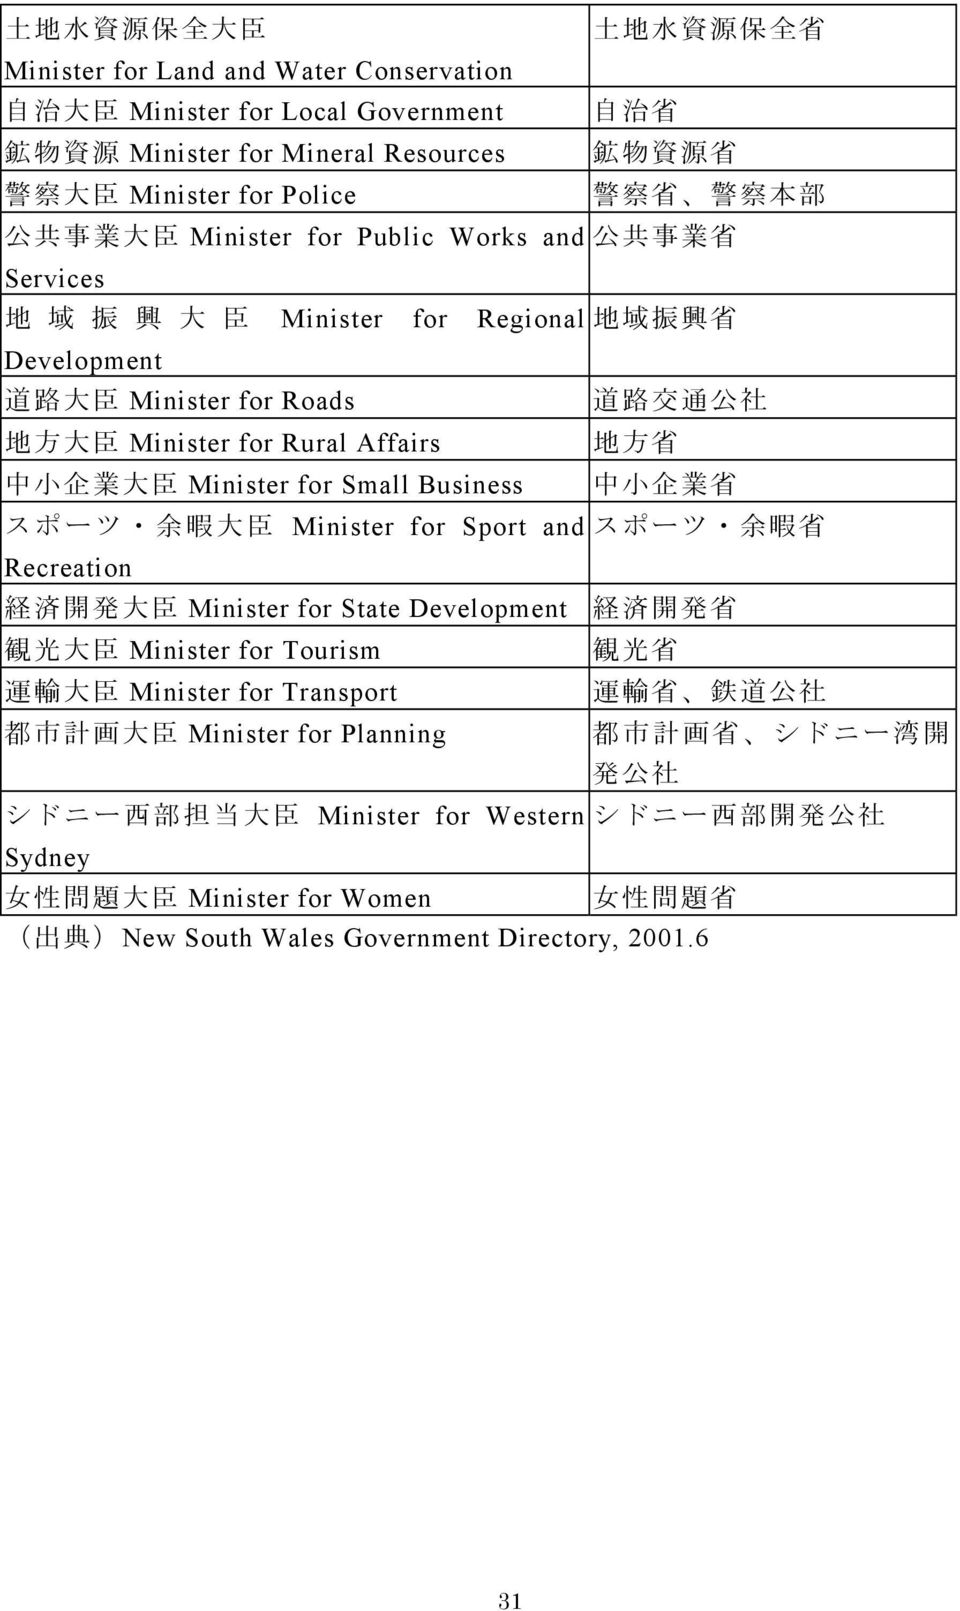 Affairs 地 方 省 中 小 企 業 大 臣 Minister for Small Business 中 小 企 業 省 スポーツ 余 暇 大 臣 Minister for Sport and スポーツ 余 暇 省 Recreation 経 済 開 発 大 臣 Minister for State Development 経 済 開 発 省 観 光 大 臣 Minister for